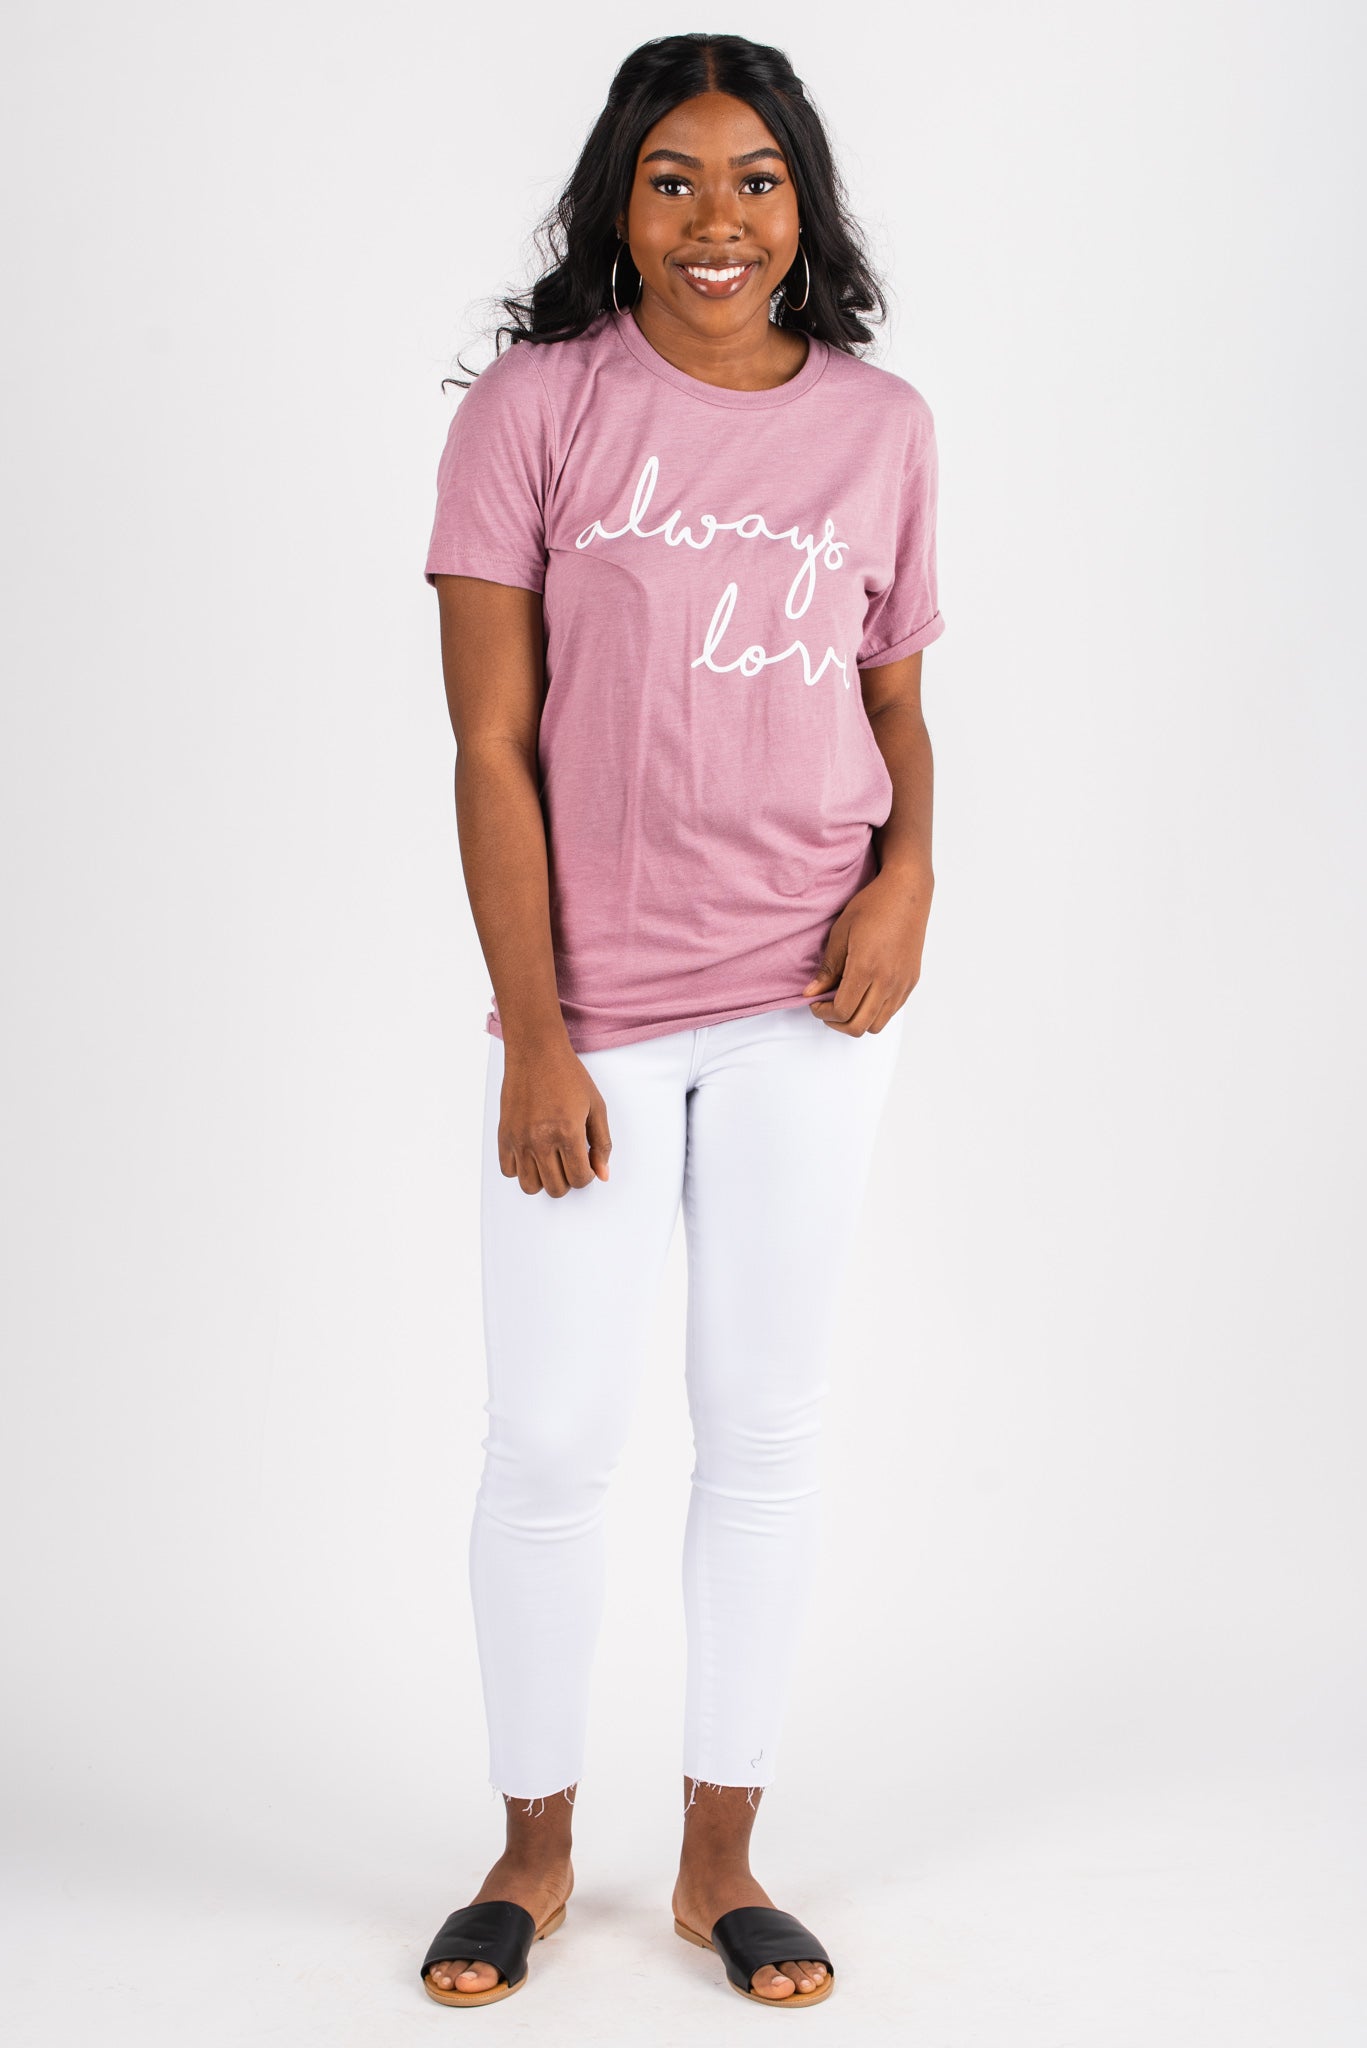 Always Love unisex short sleeve crew neck t-shirt orchid - Cute T-shirts - Funny T-Shirts at Lush Fashion Lounge Boutique in Oklahoma City